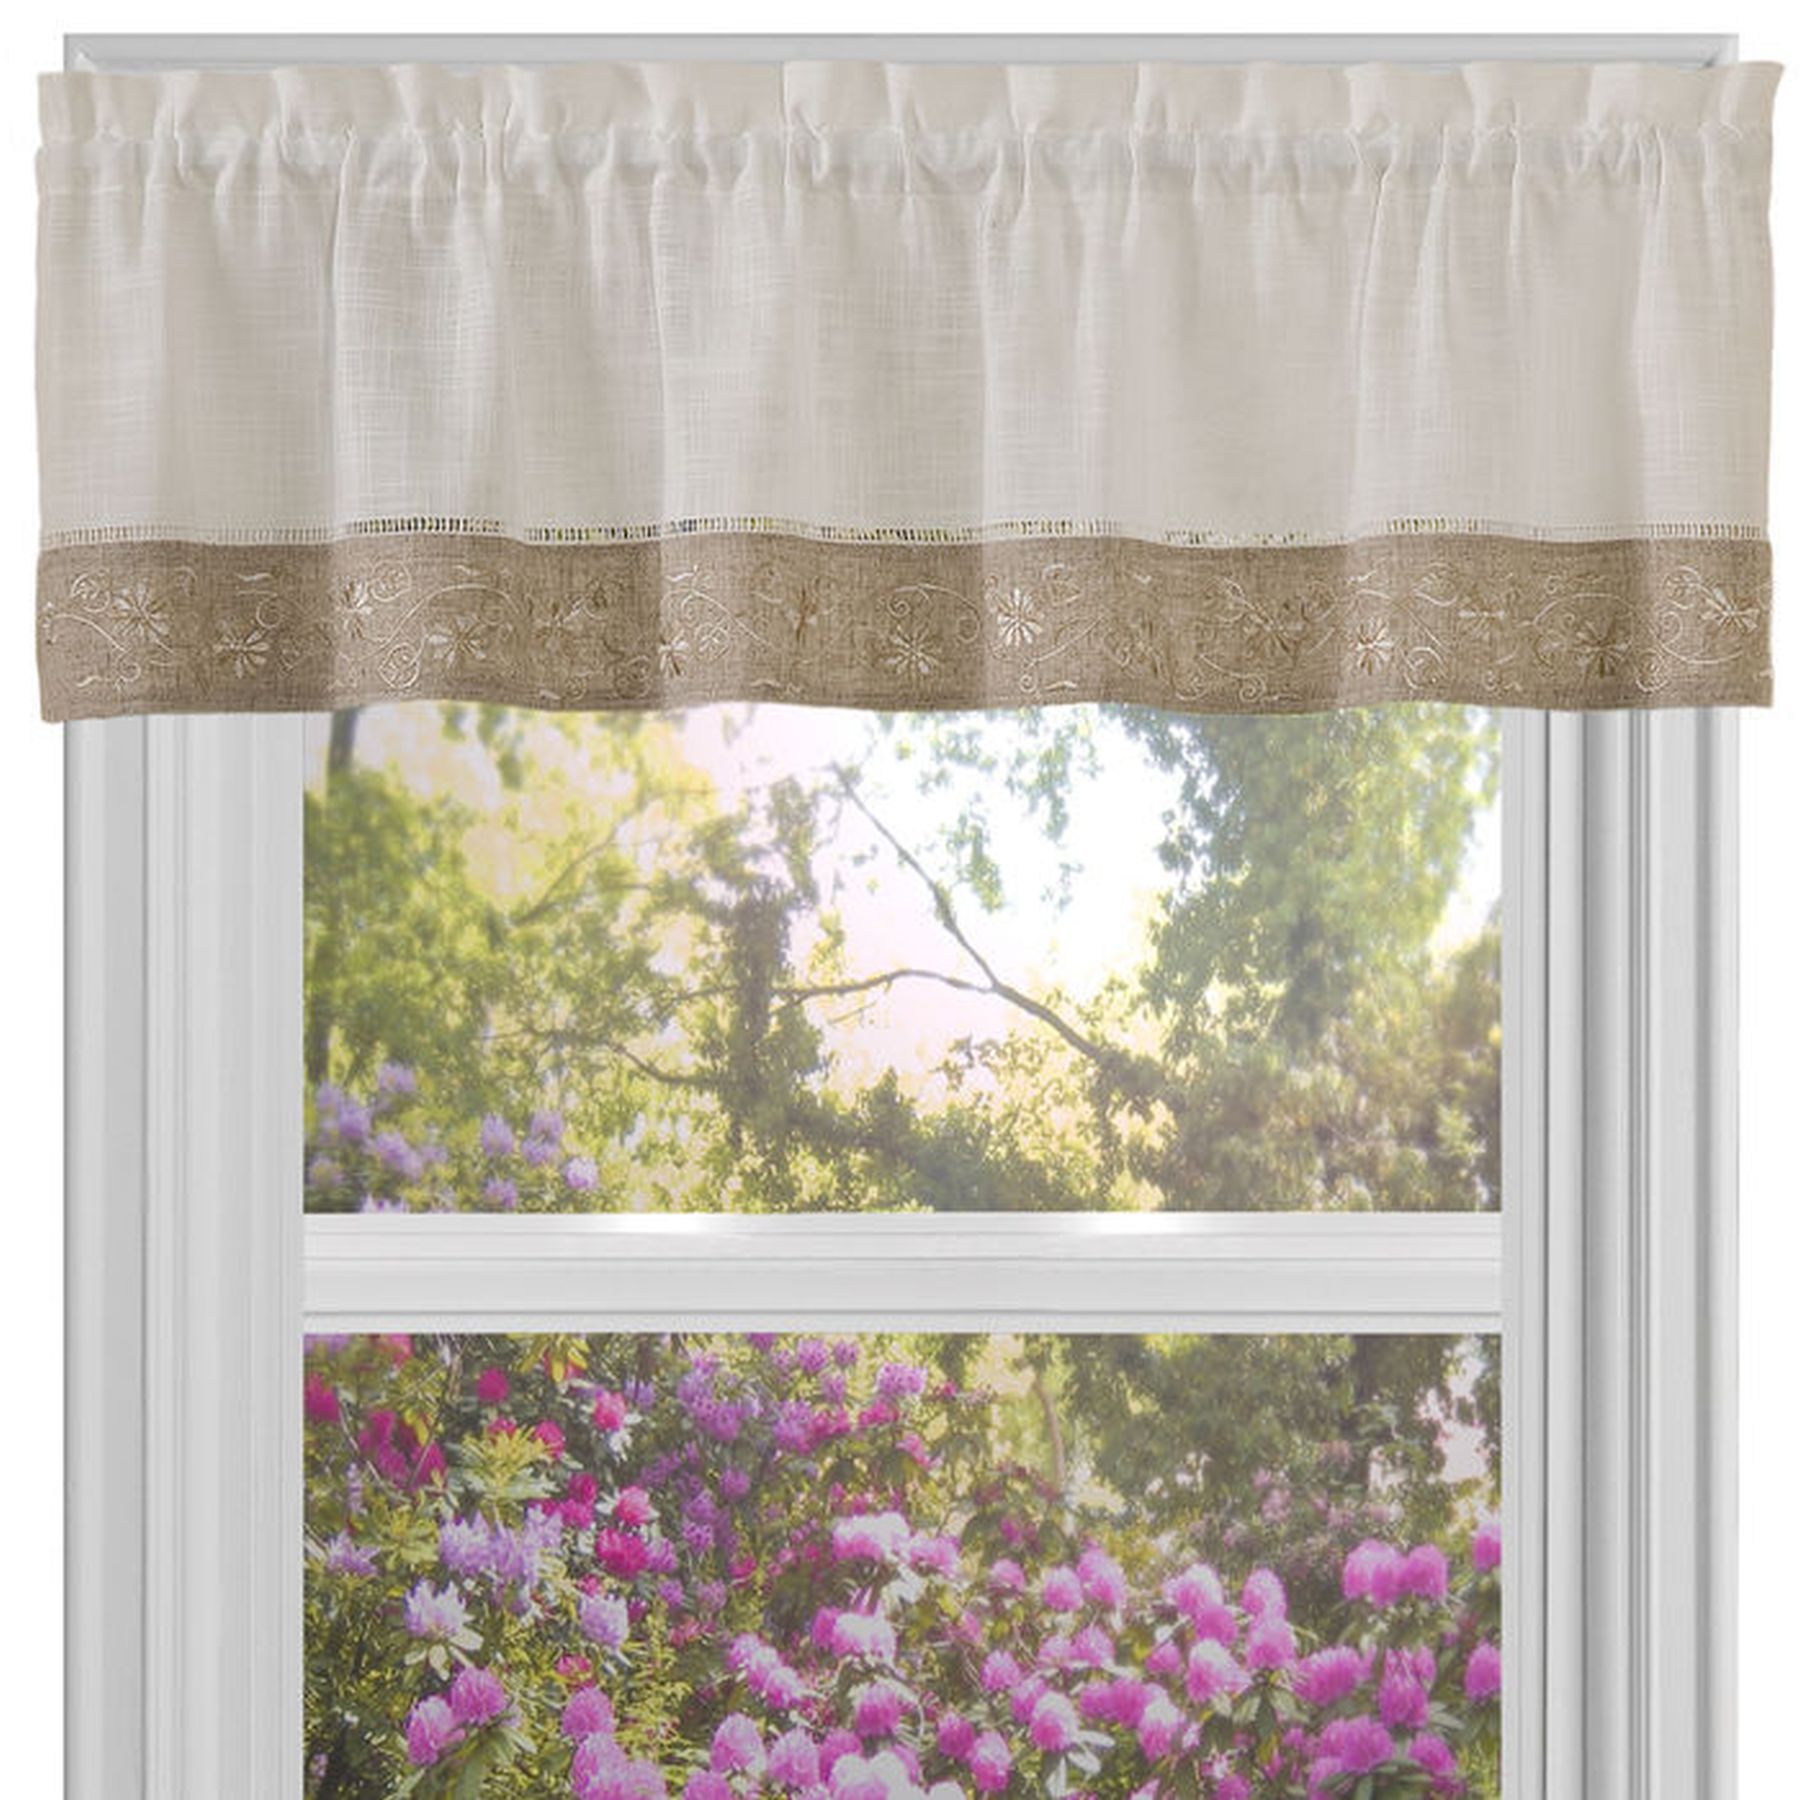 Traditional Elegance Oakwood 58x14 Window Curtain Valance – Natural With Regard To Oakwood Linen Style Decorative Window Curtain Tier Sets (View 13 of 20)